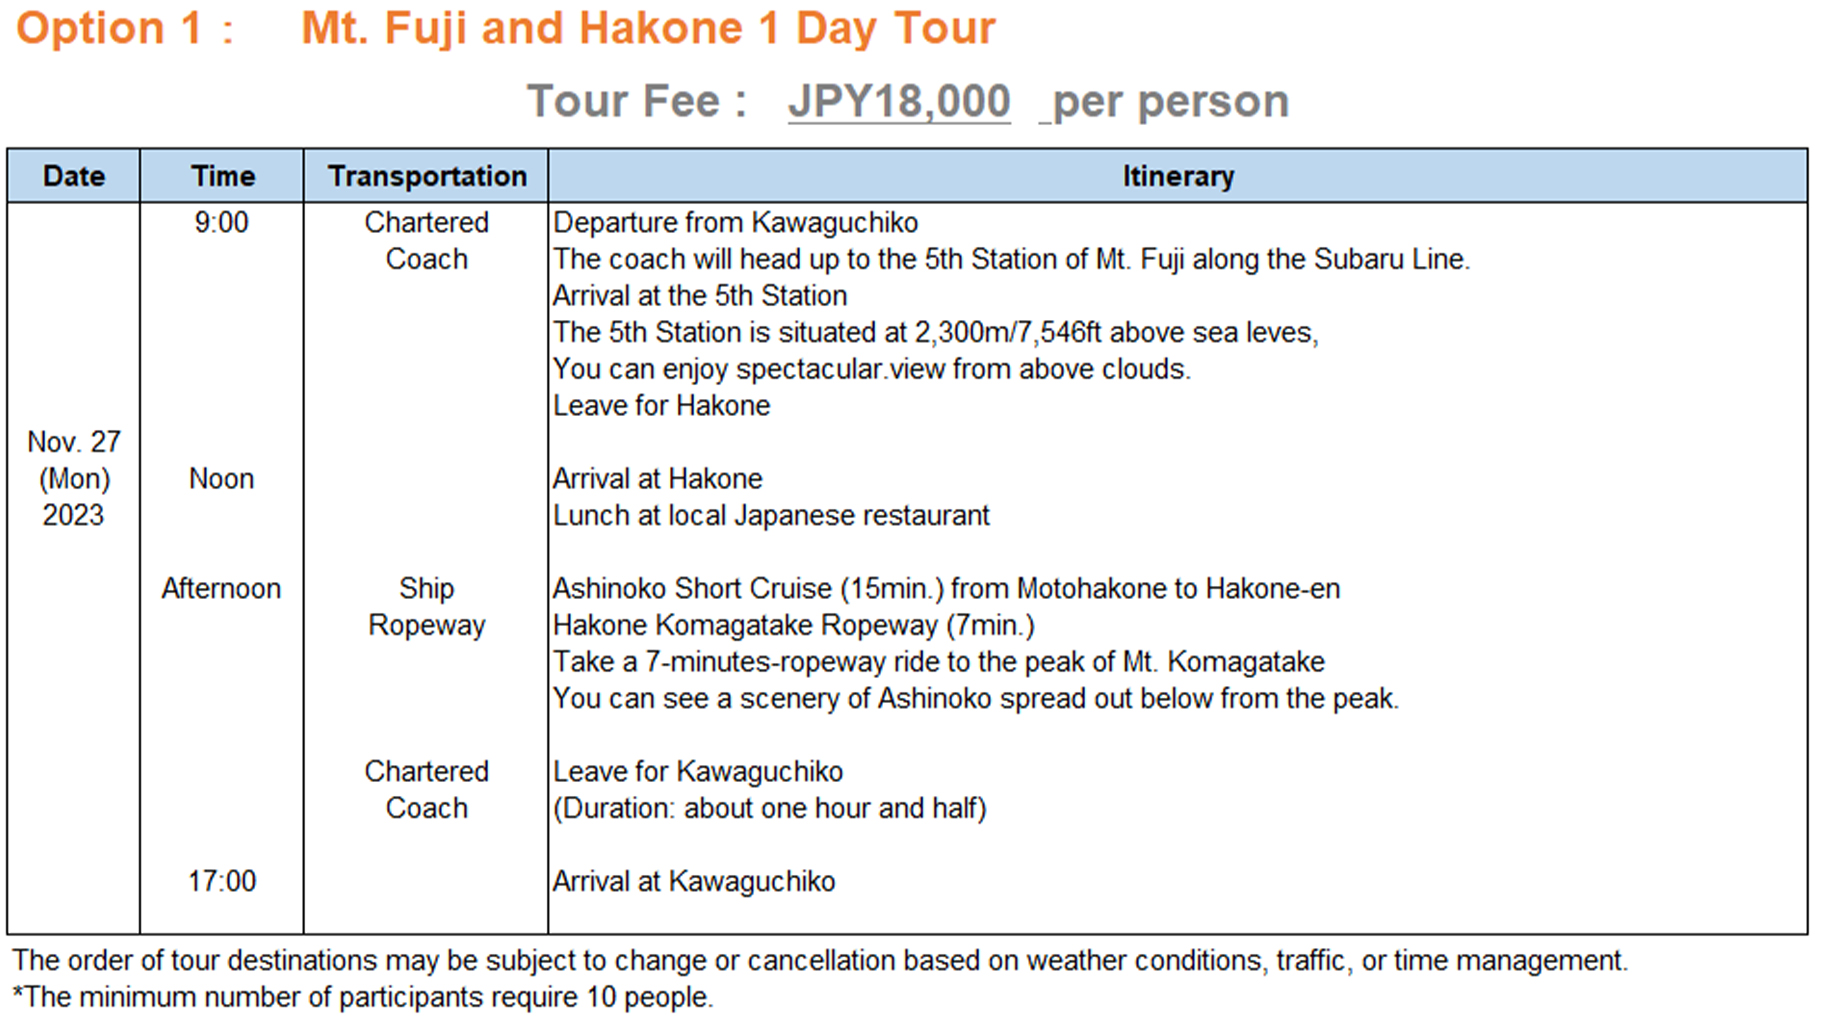 Option 1: Mt. Fuji and Hakone 1 Day Tour Schedule Table